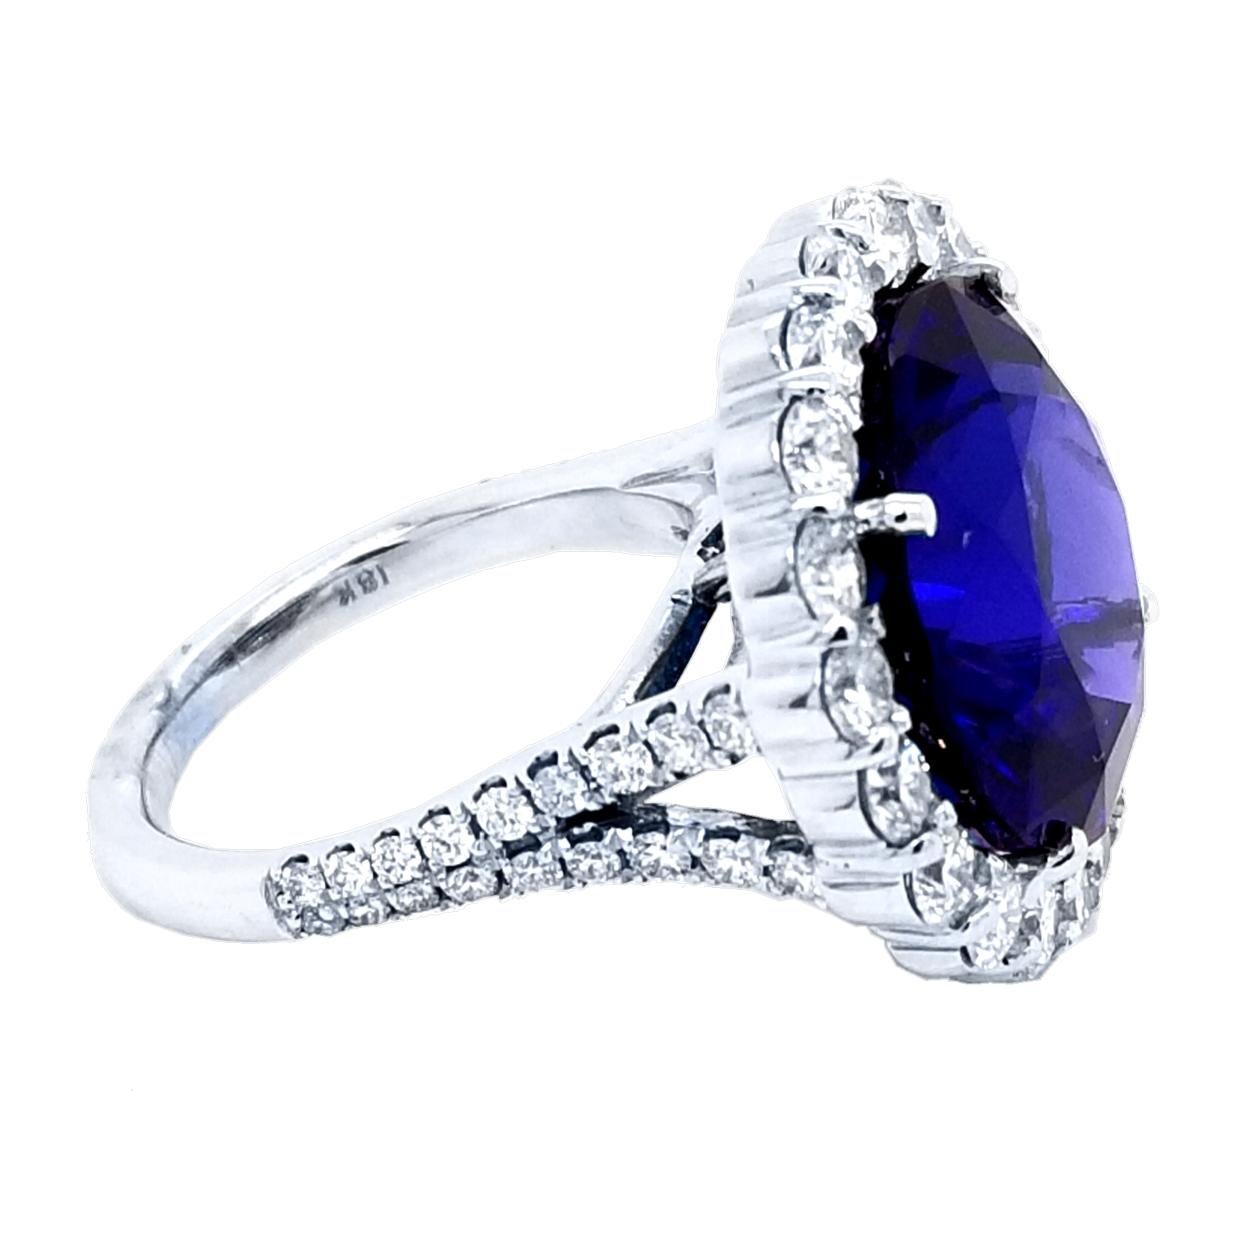 A beautiful color 16.67 Ct Round shaped tanzanite set in the center of an 18K split shank pave set diamond engagement ring with a halo to create great contrast. 

Details:
Center Stone: 16.67 carat GIA Certified Round tanzanite
Side Stone Diamonds: